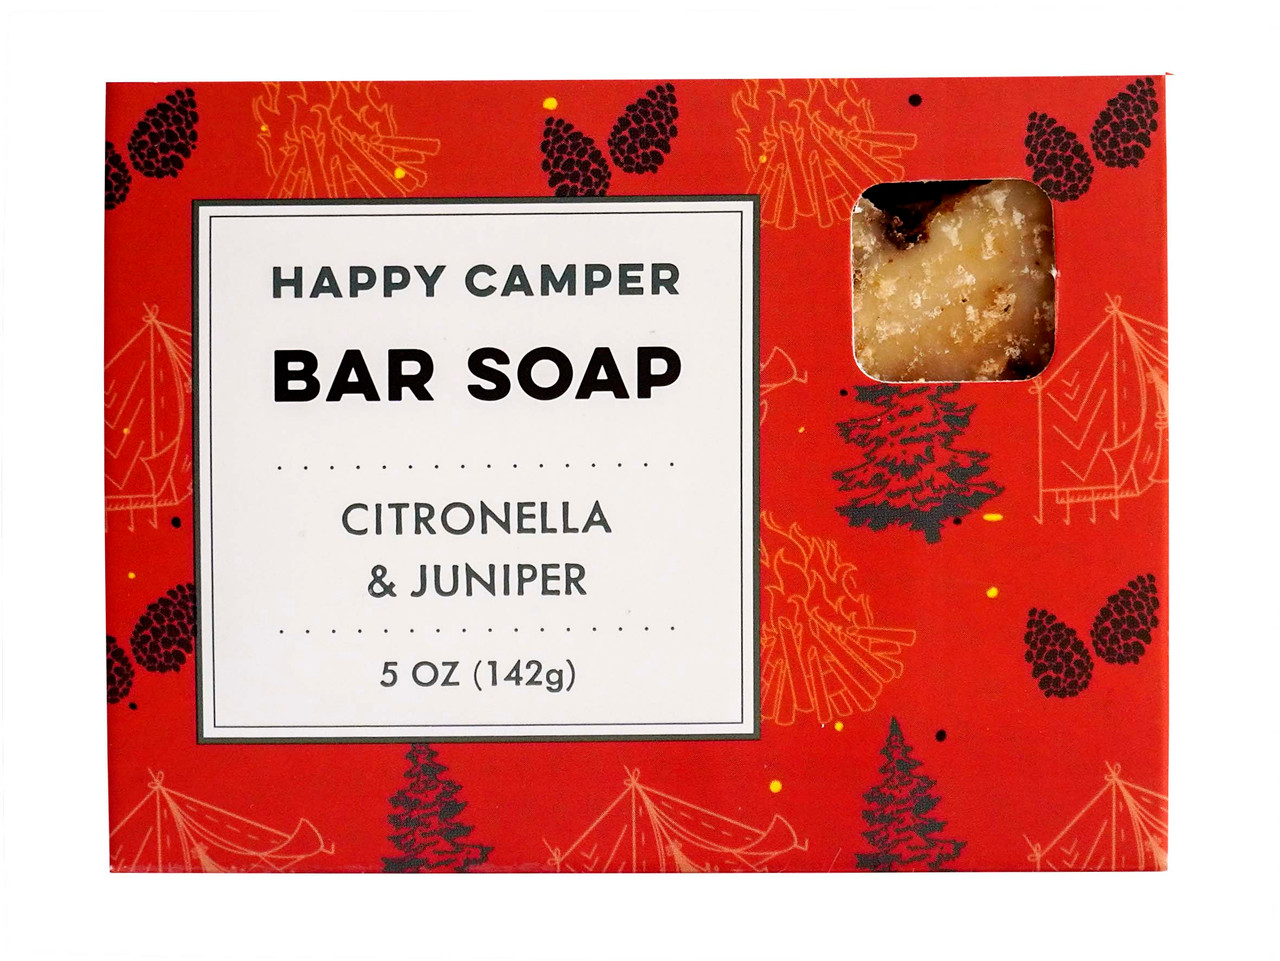 DAYSPA Body Basics Happy Camper Handmade Soap - Naturally Insect Repelling | Eco Friendly, 100% Vegan, Cold Processed Castile Soap, Handmade in USA in Small Batches